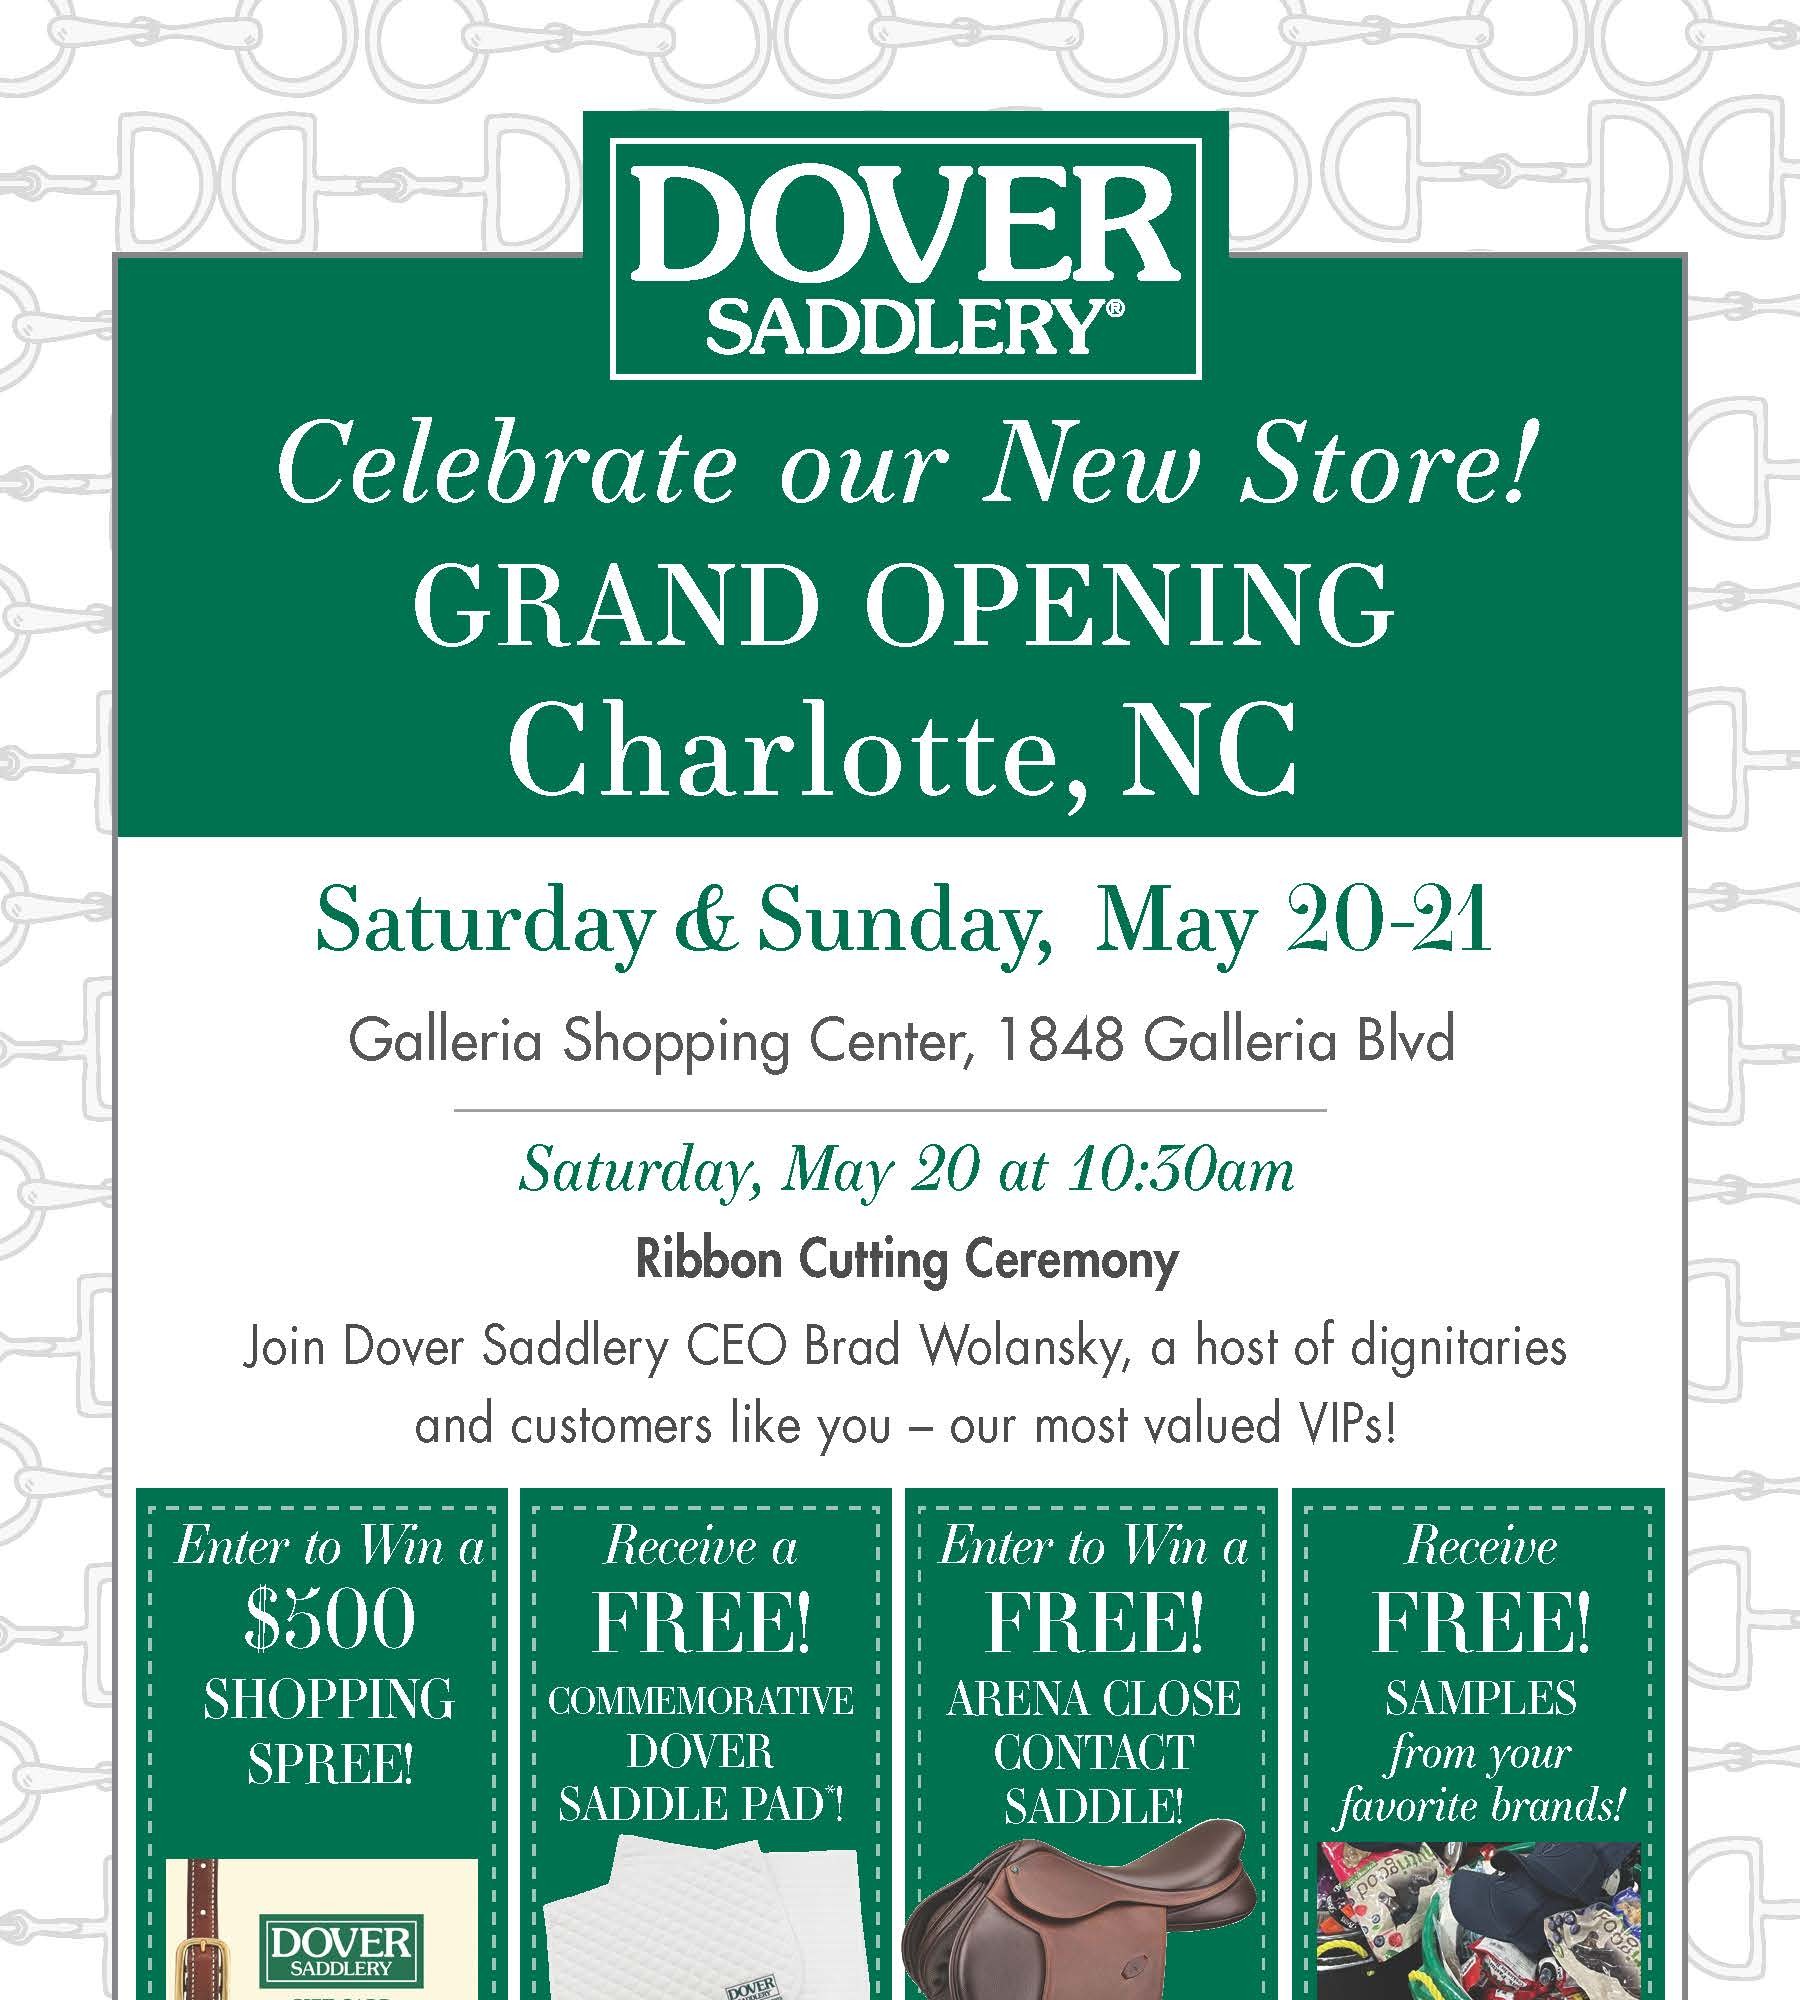 Dover Saddlery Grand Opening and Ribbon Cutting Celebration Overridden